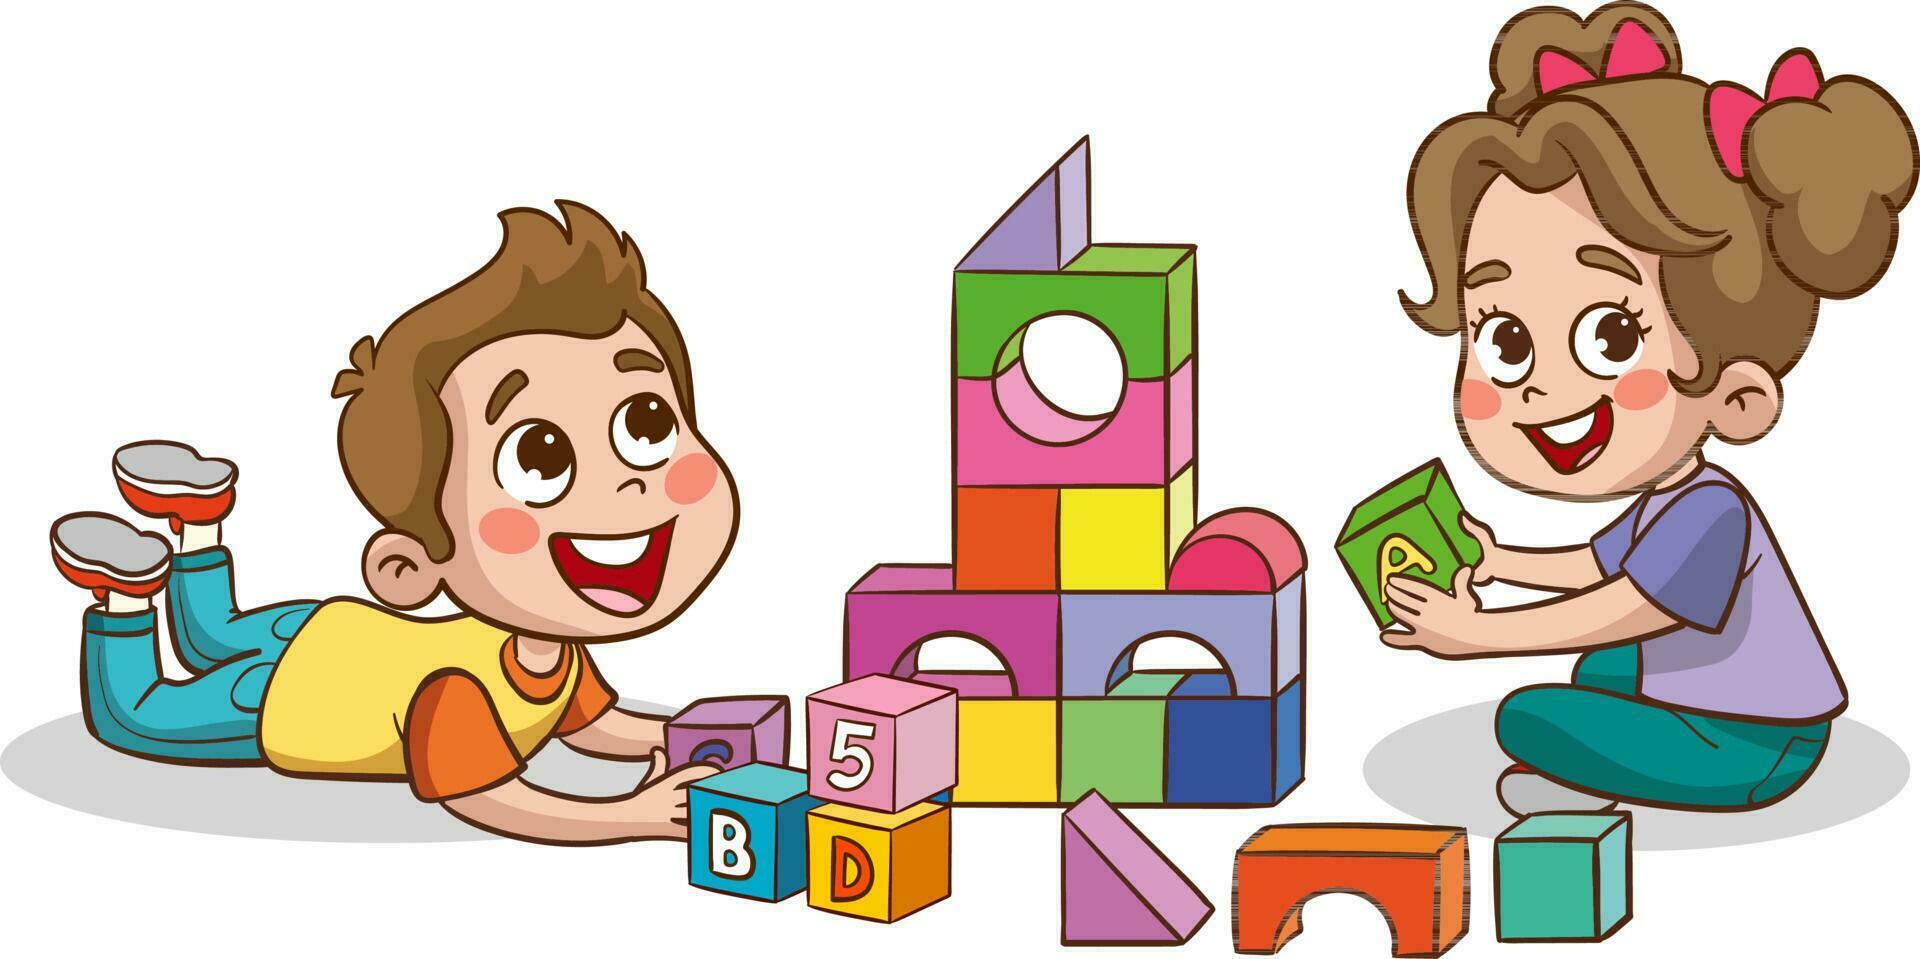 Illustration of Kids Playing with Colorful Blocks on a White Background vector